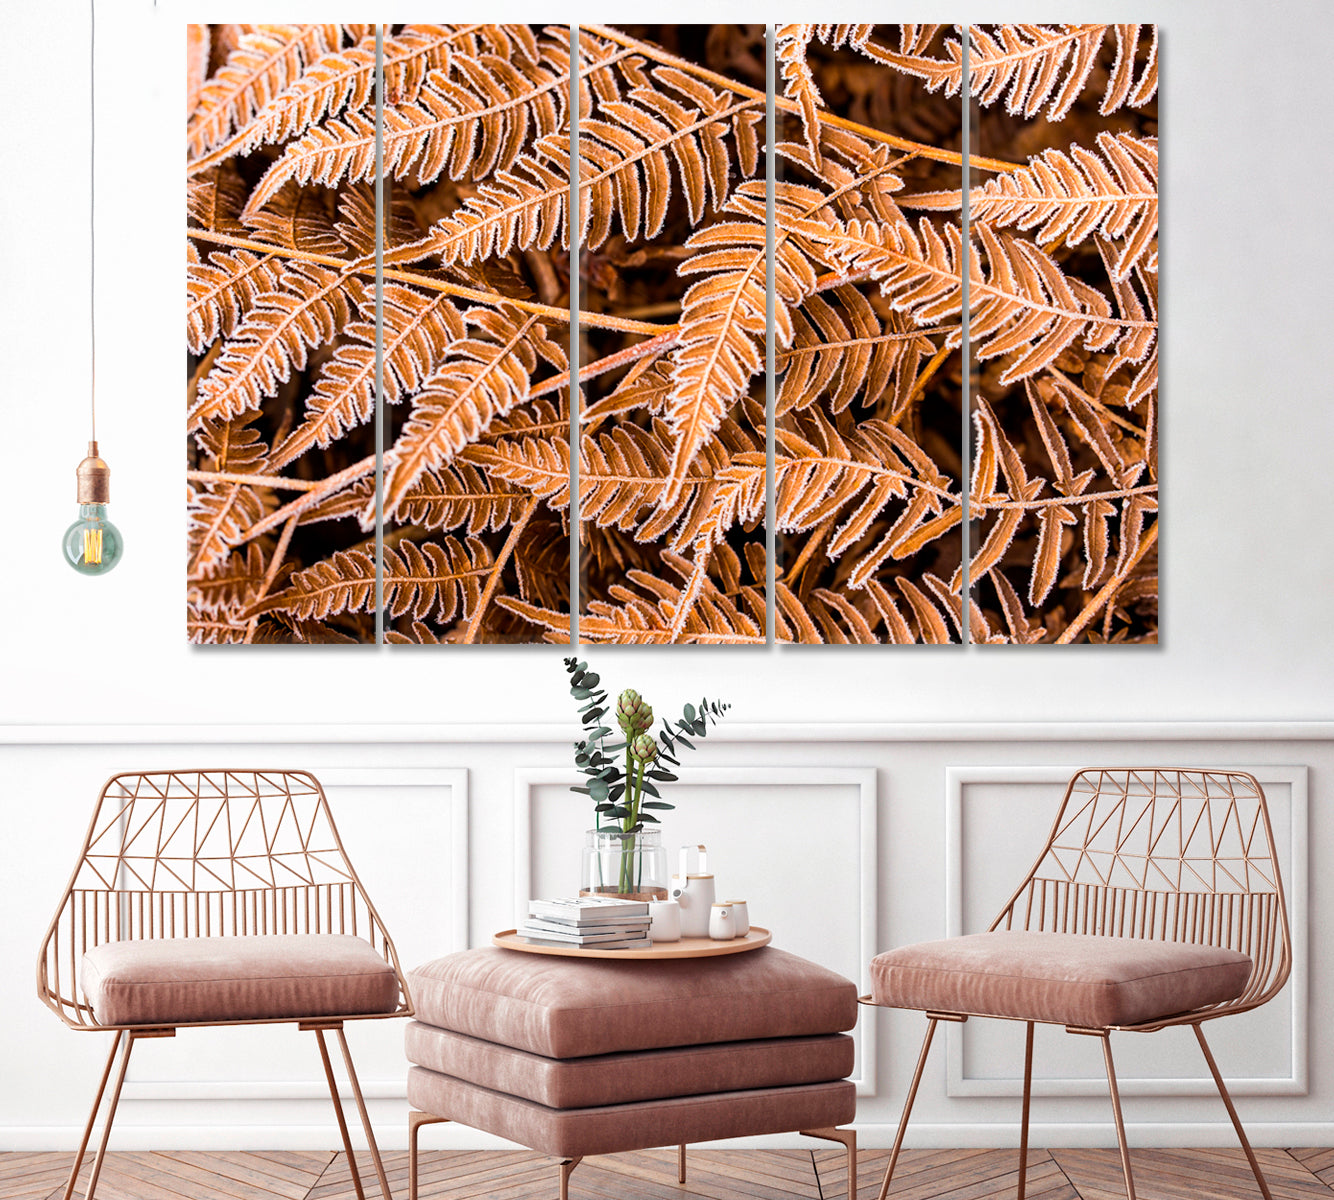 Frost on Fern Leaves Canvas Print ArtLexy 5 Panels 36"x24" inches 